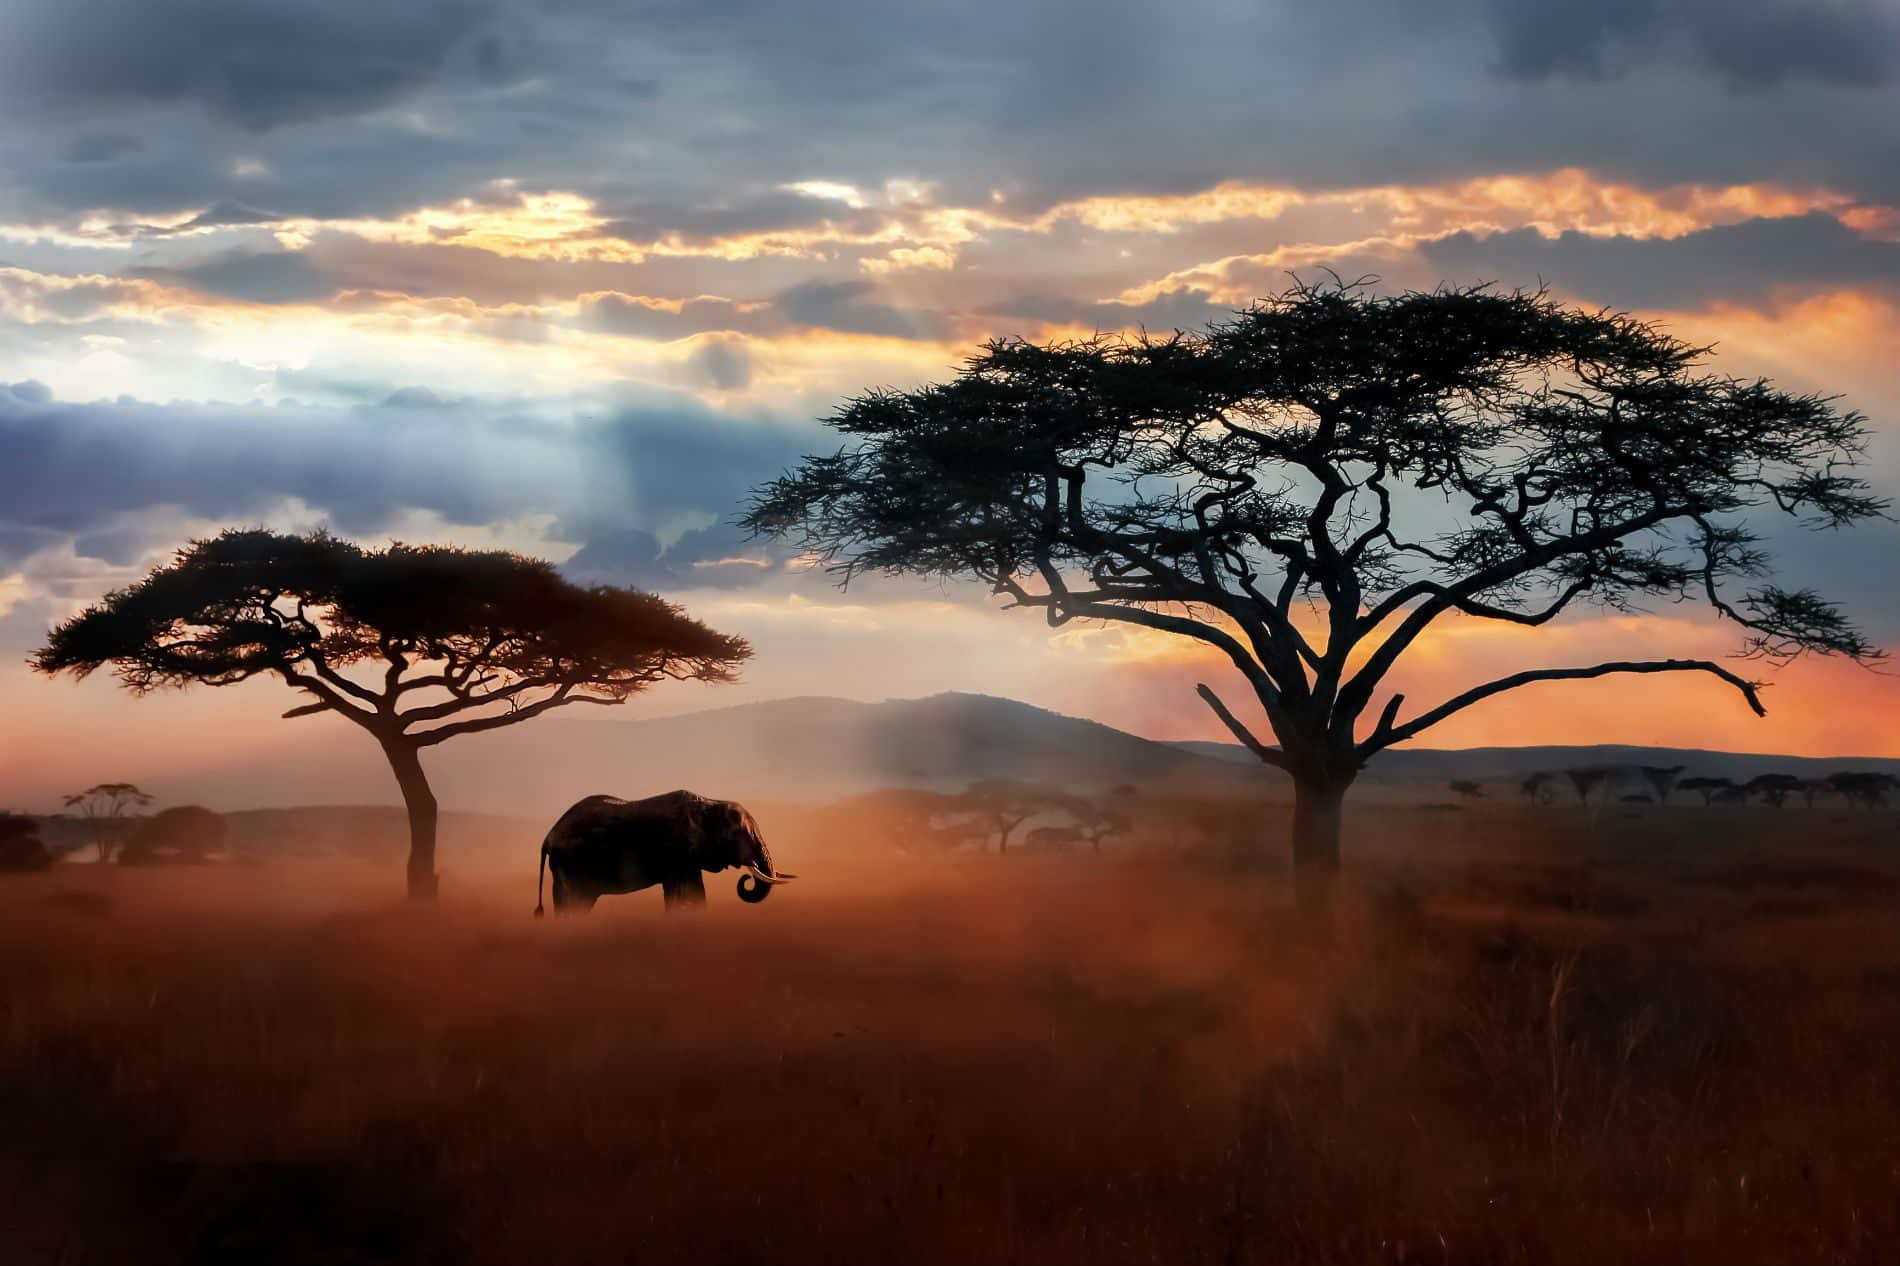 A wild life panorama with an elephant between trees